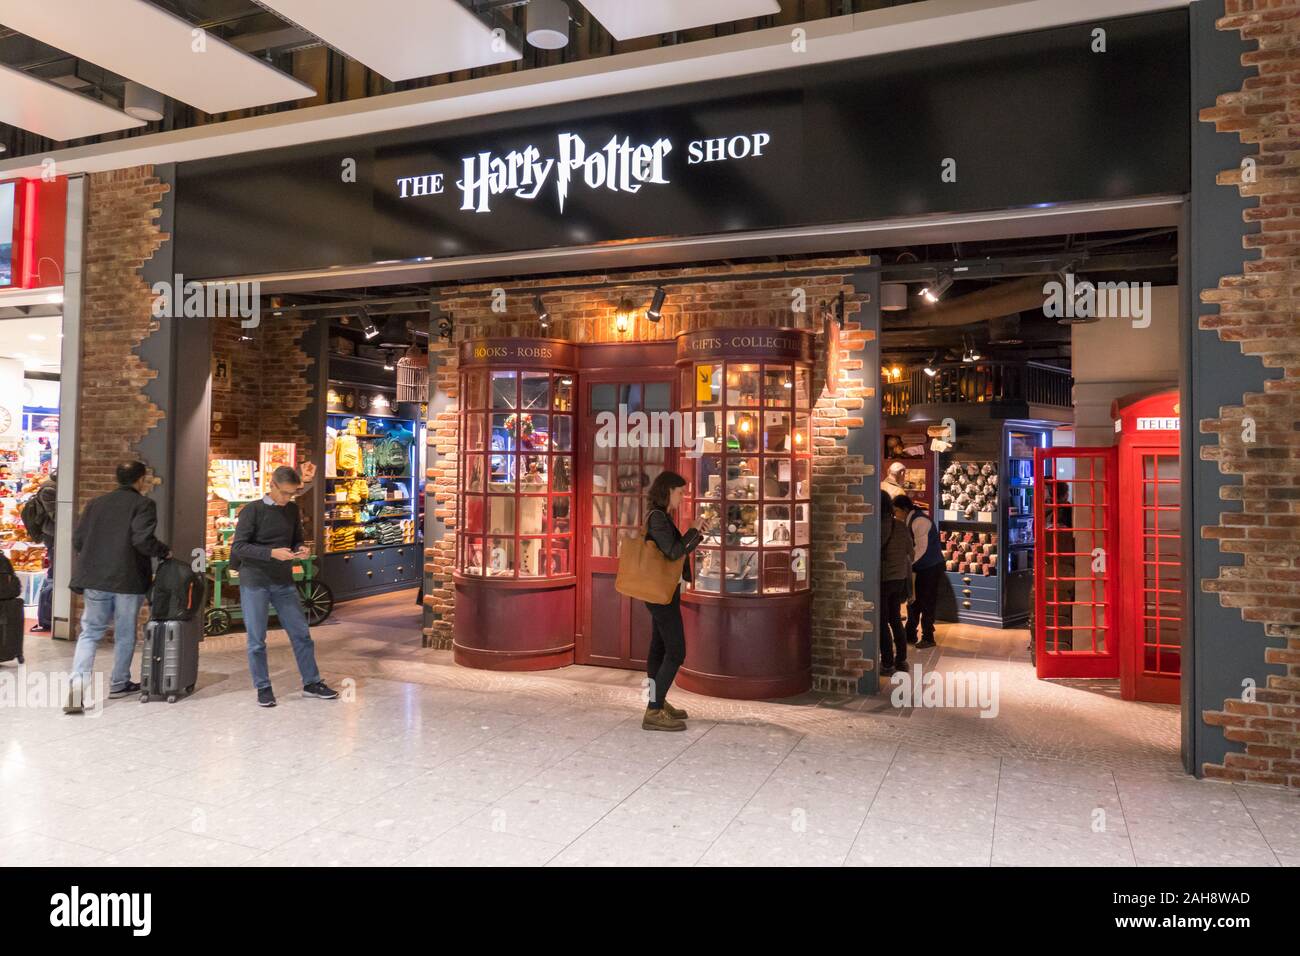 The Harry Potter shop in Heathrow airport Stock Photo - Alamy